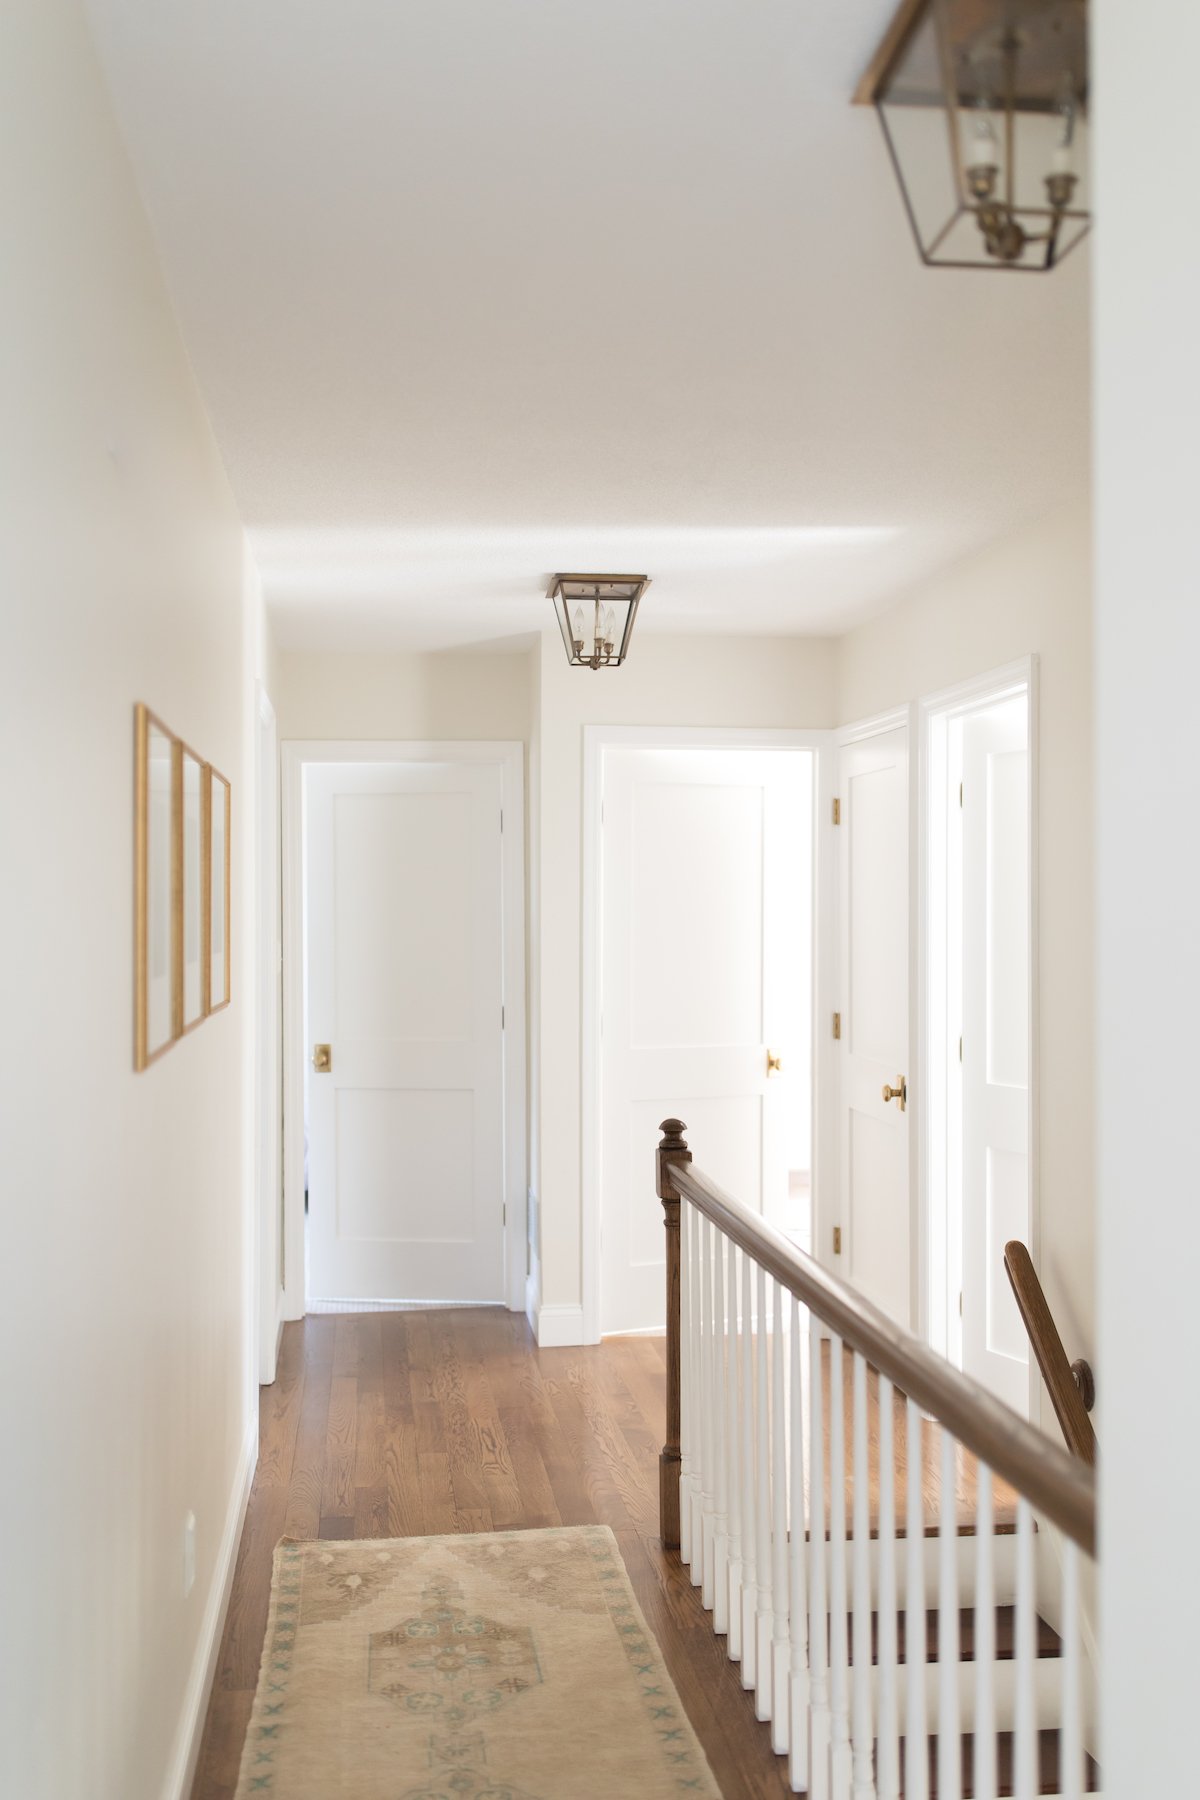 A hallway with white walls, wood floors and flush mount lanterns in a brass finish.